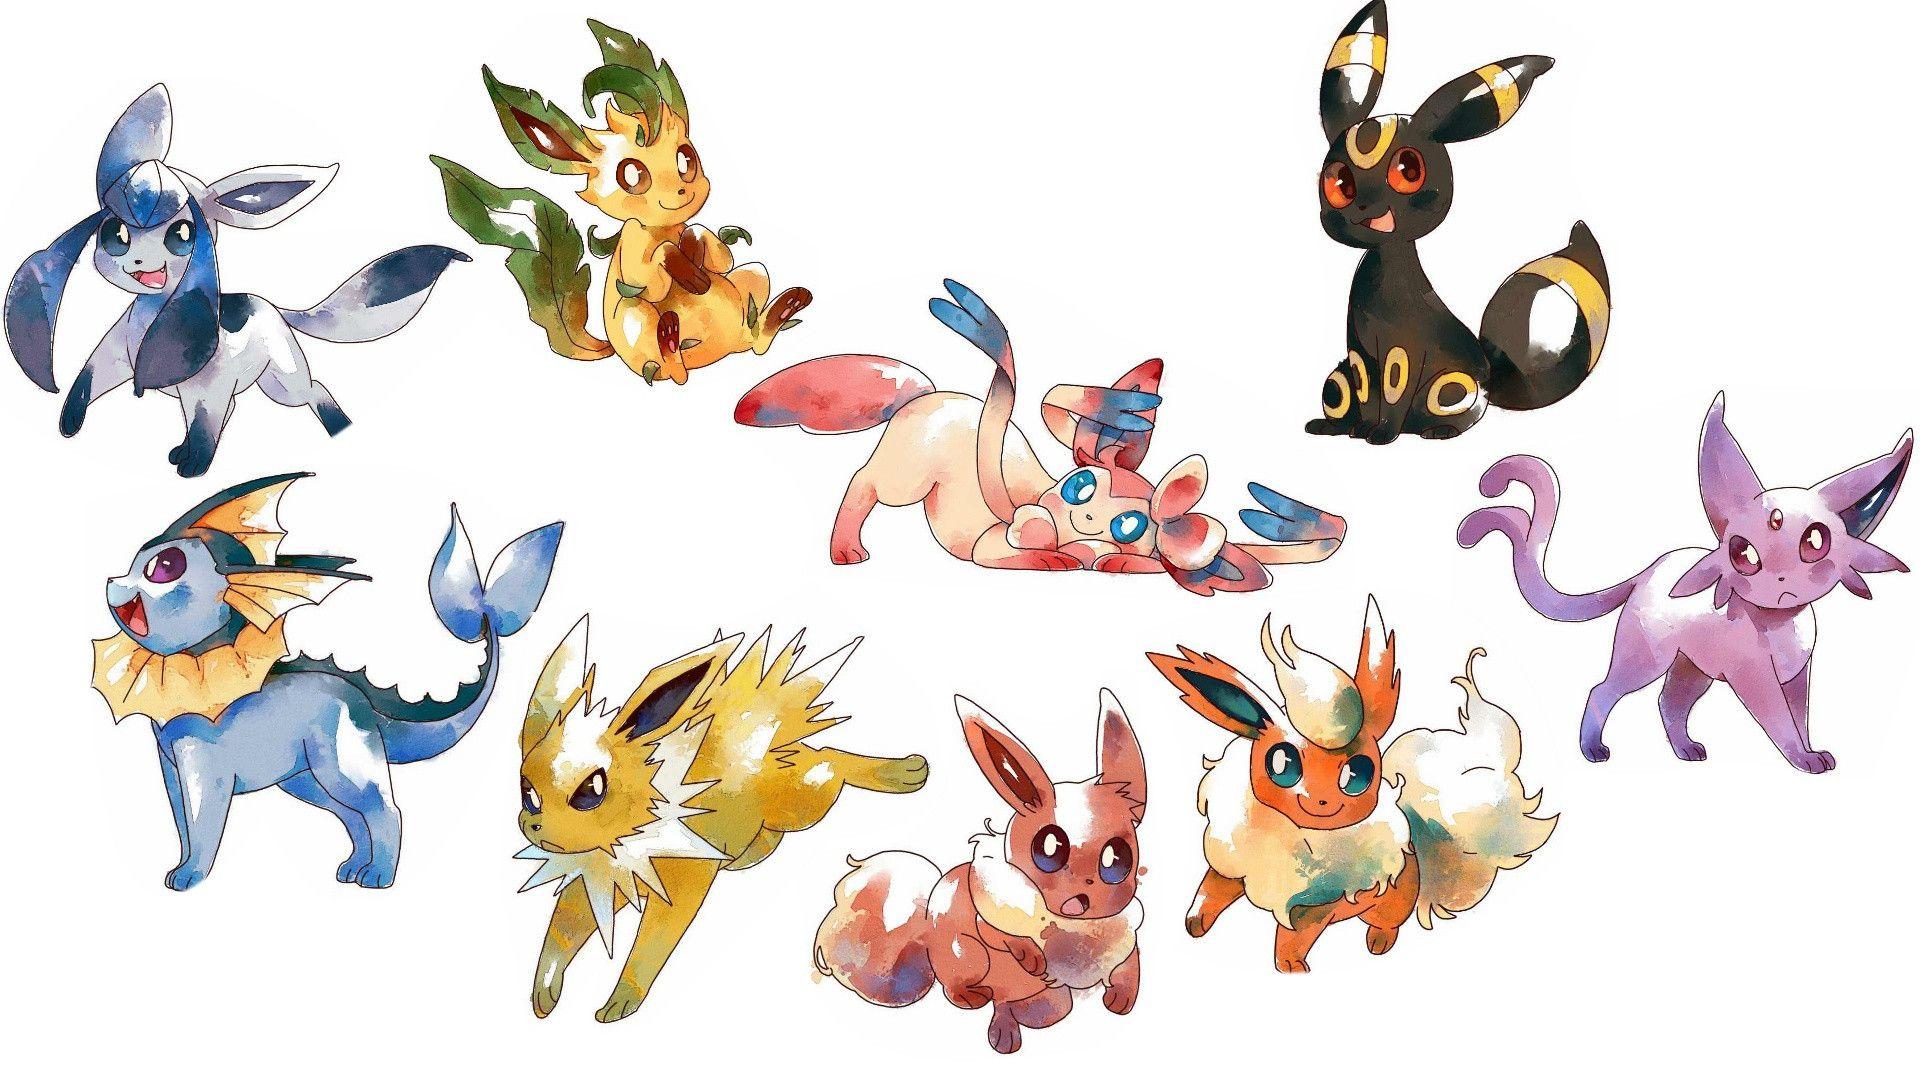 So i tried my hand at making the earlier eeveelution single